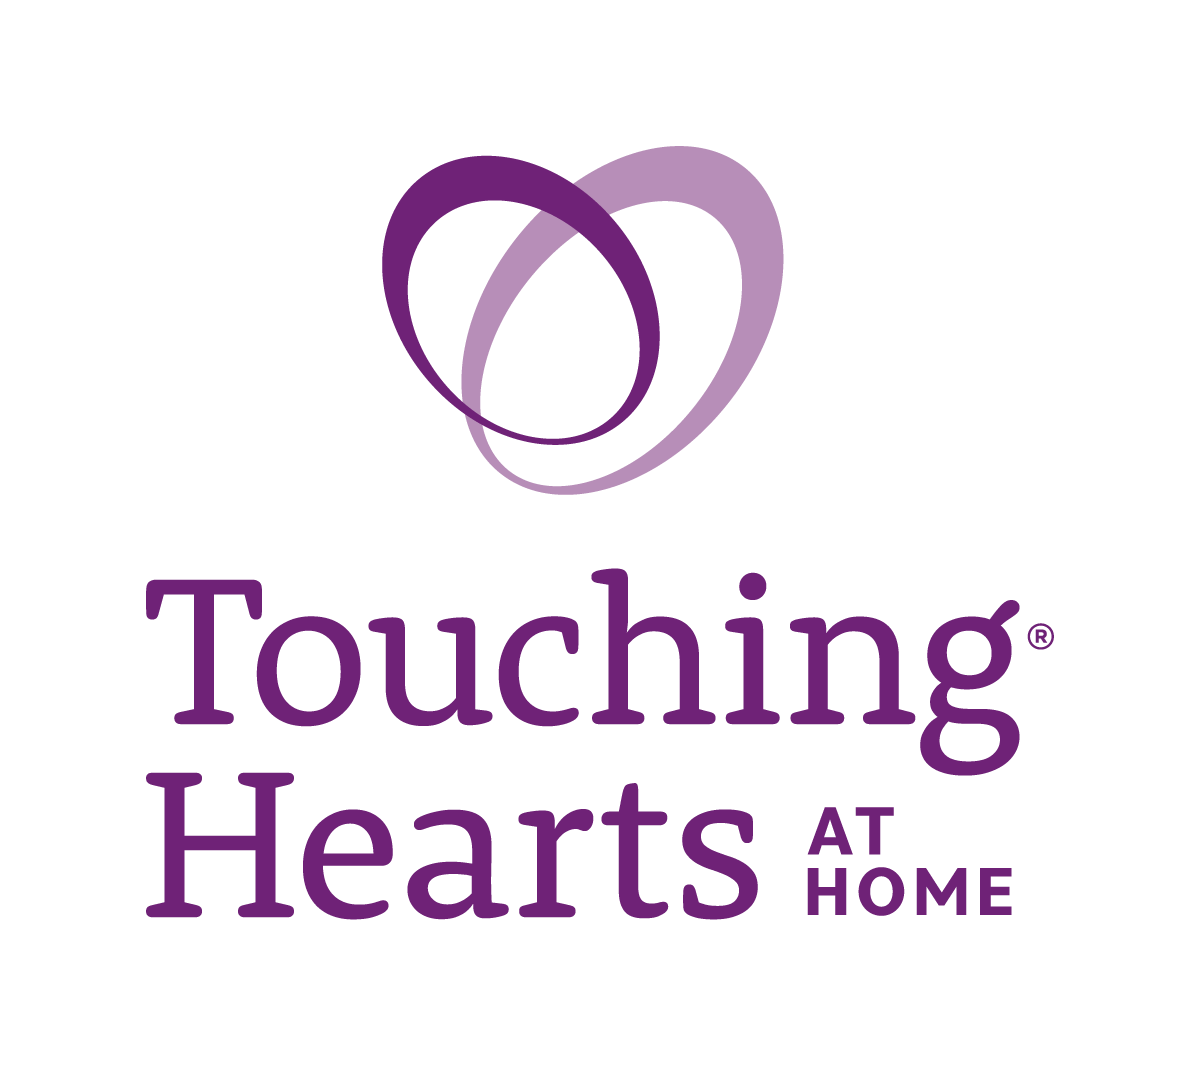 B. Touching Hearts at Home (Tier 3)